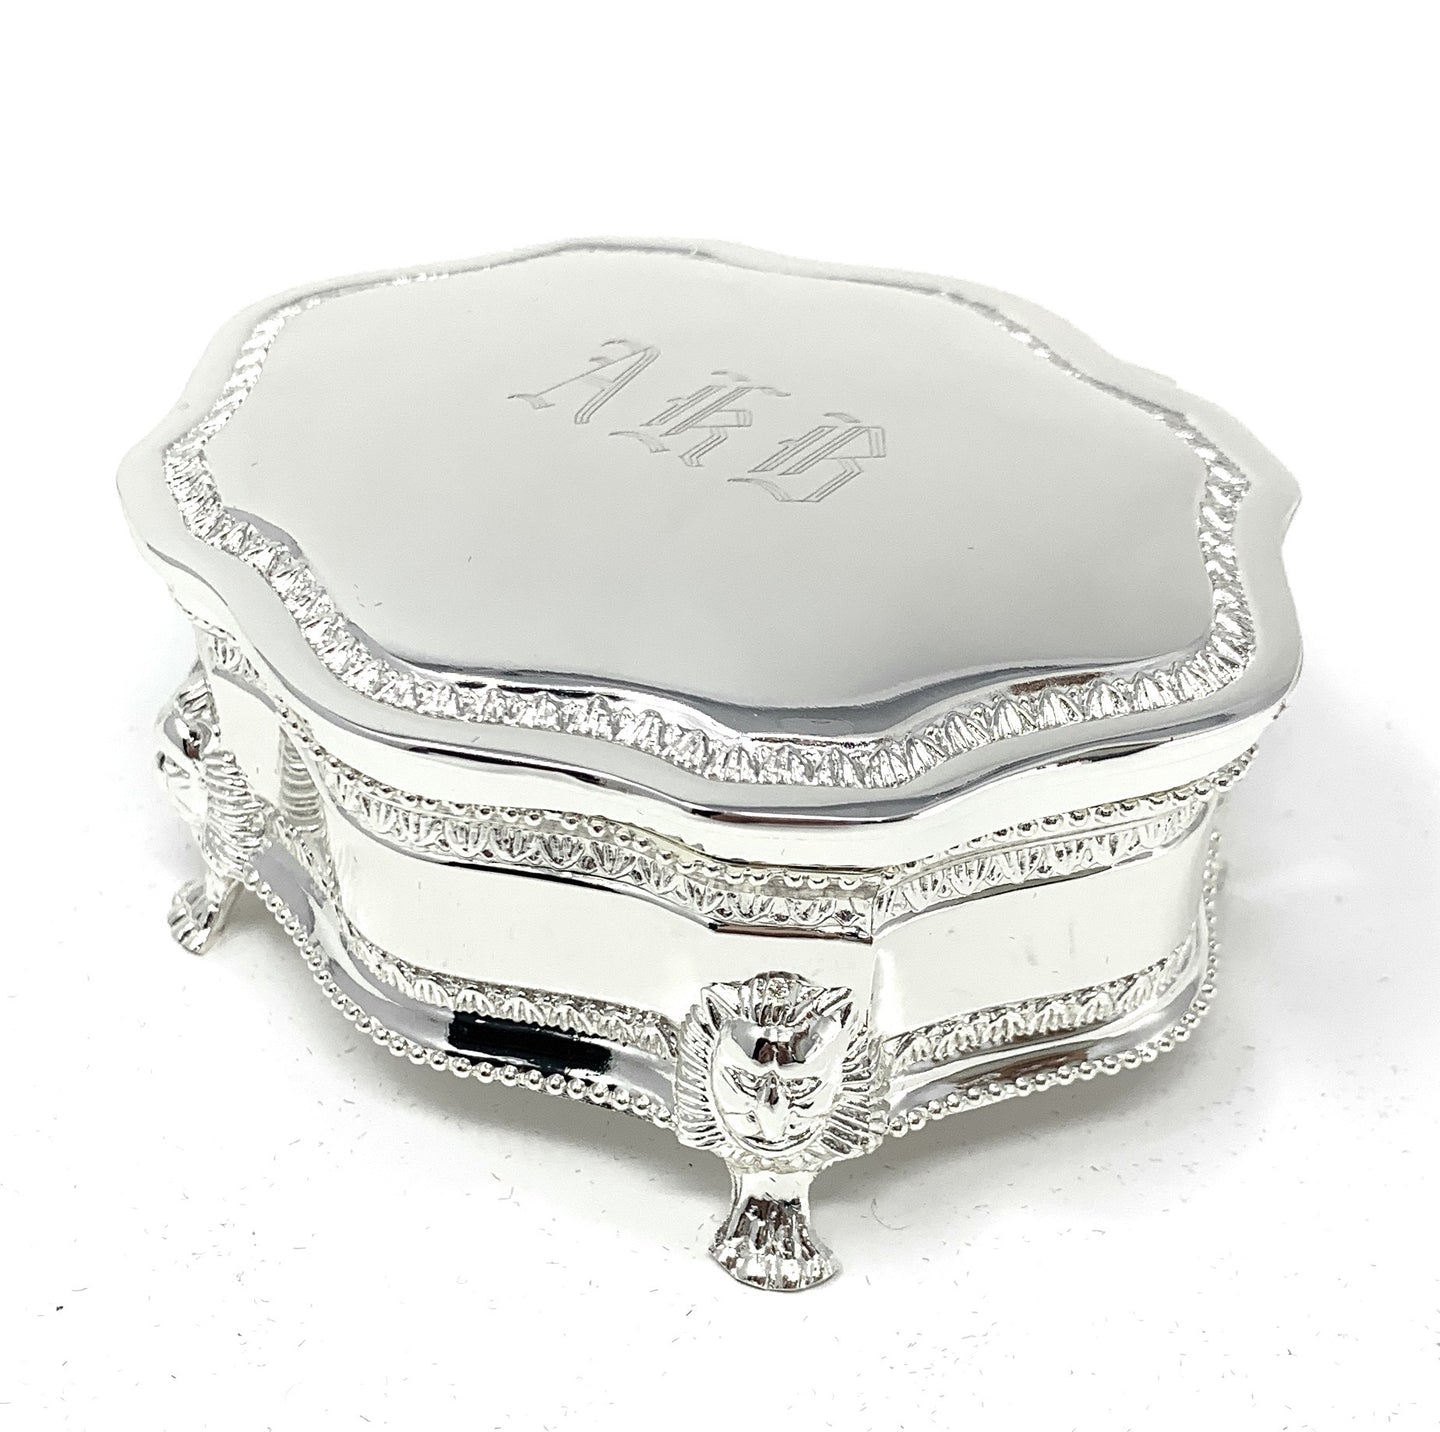 Personalized victorian style jewelry box Engraved with name and date